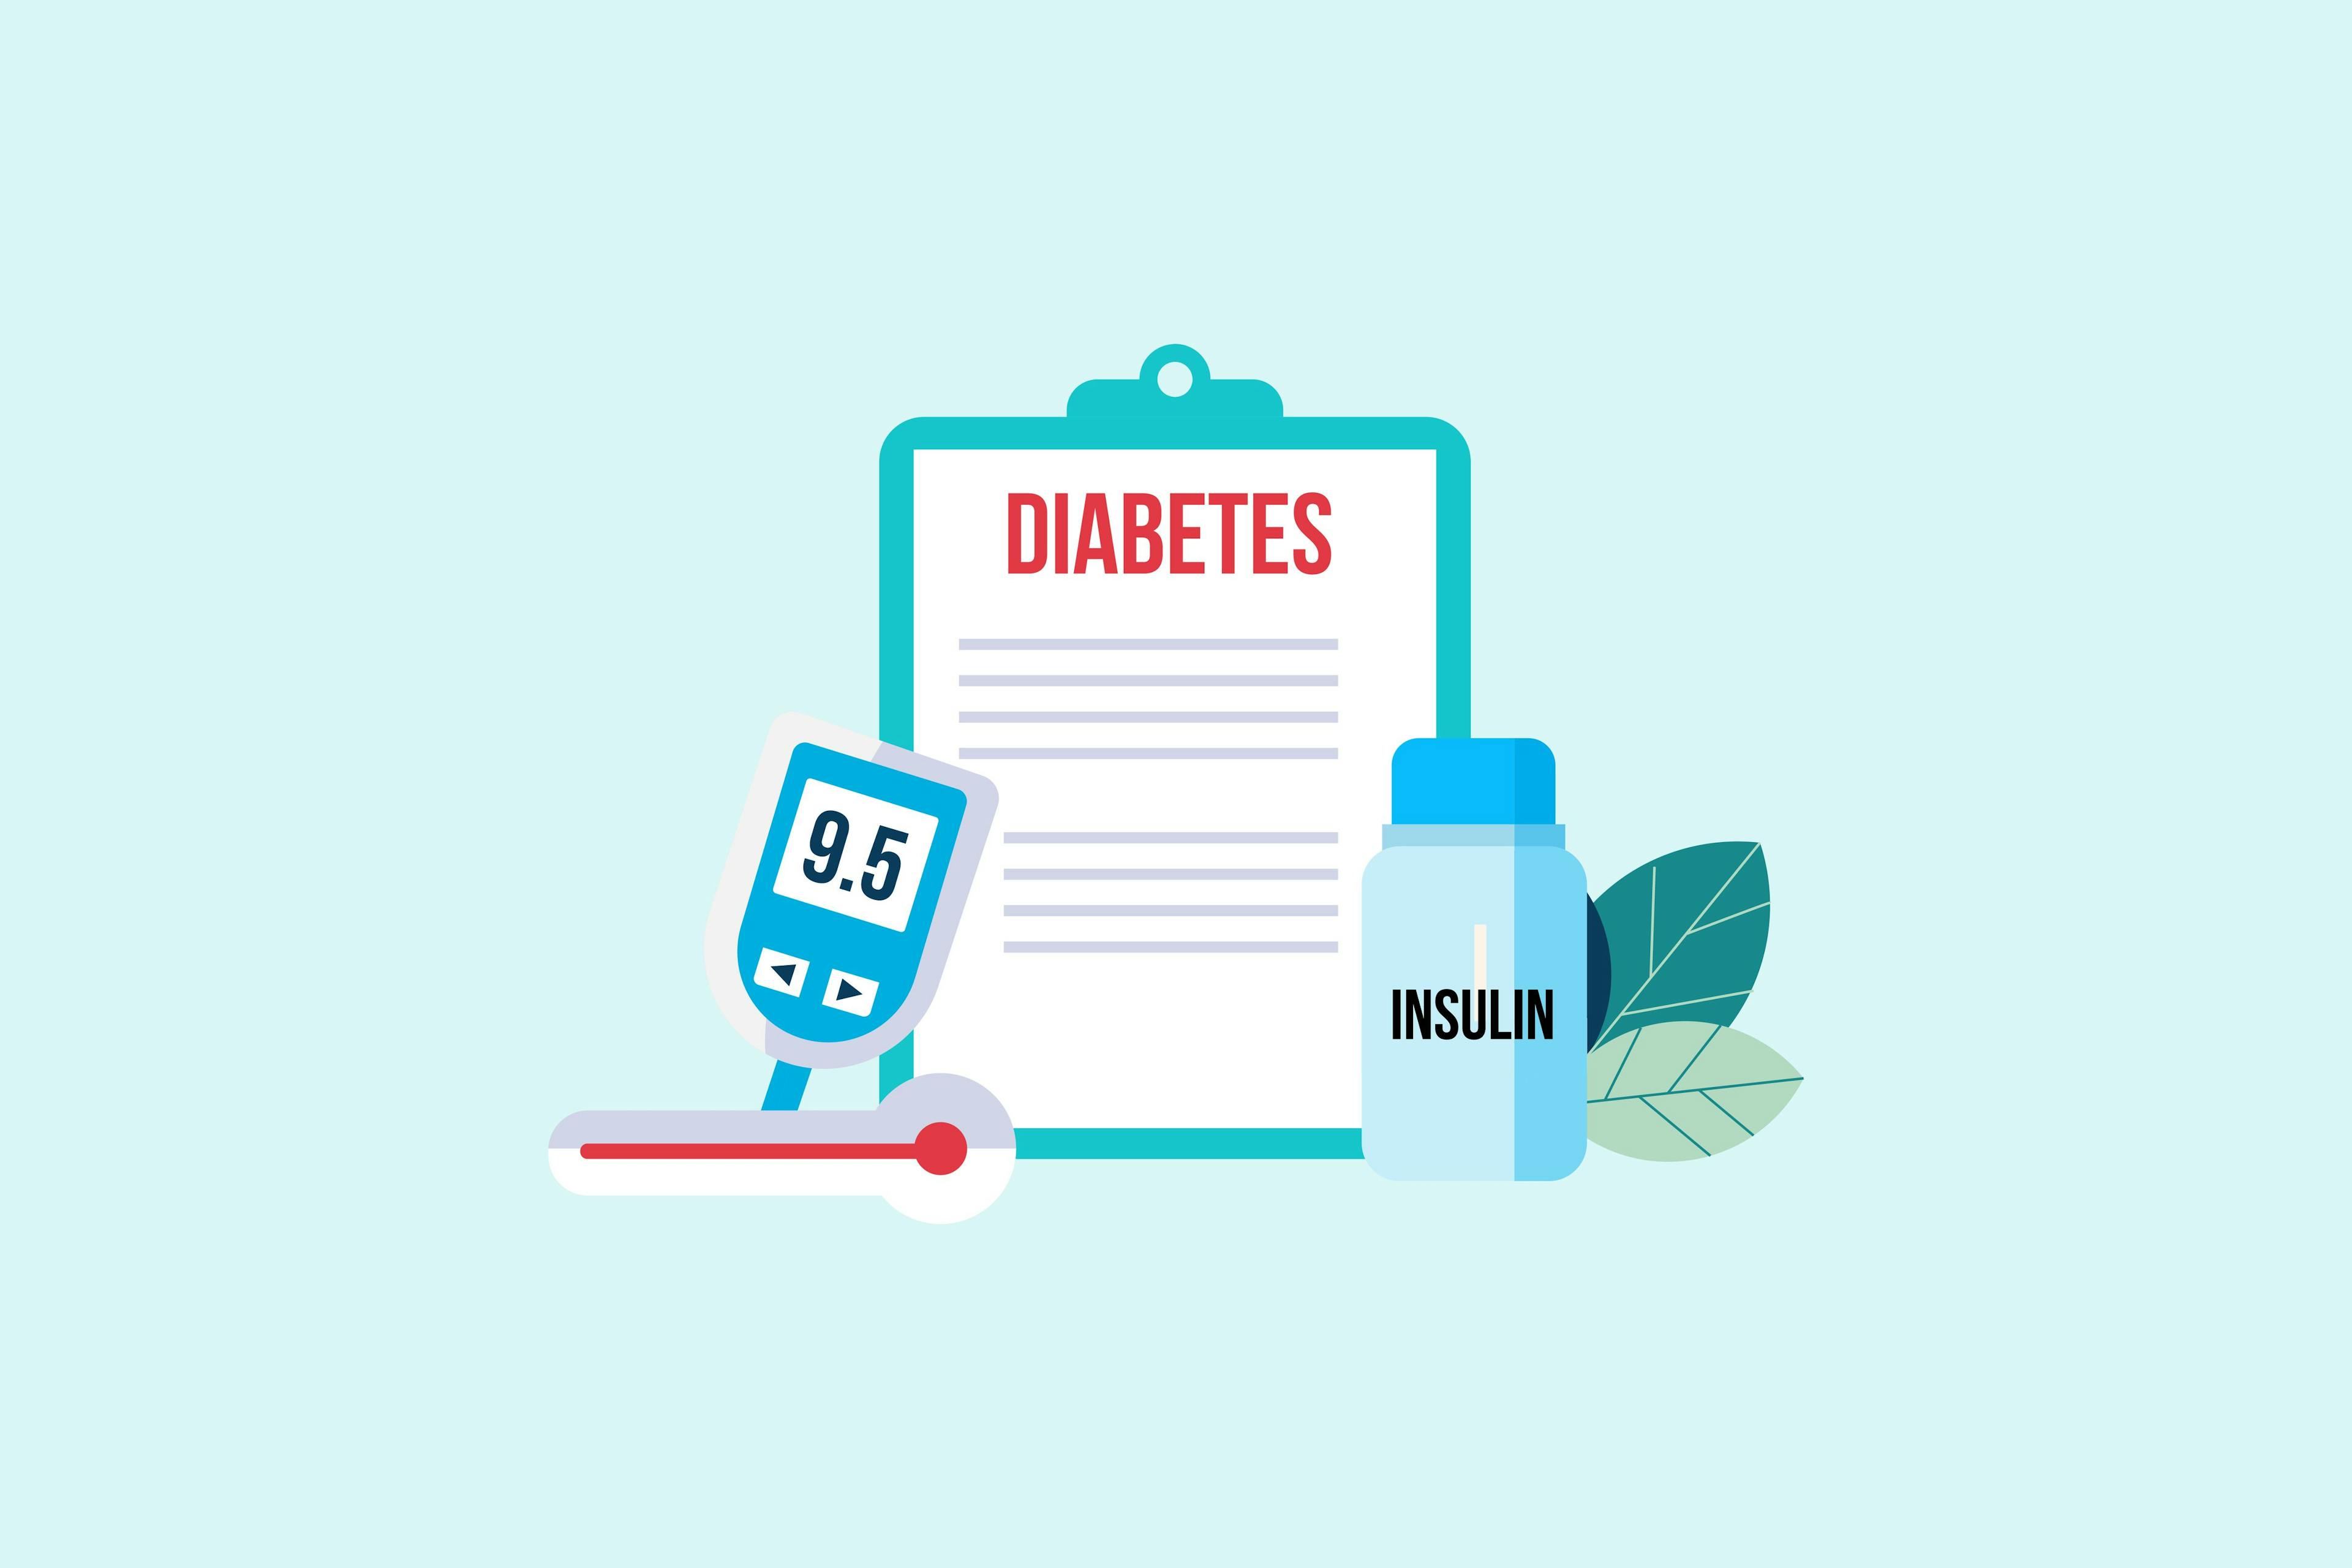 Diabetes App Improves Patient Metrics, But Physician Engagement May Be Key